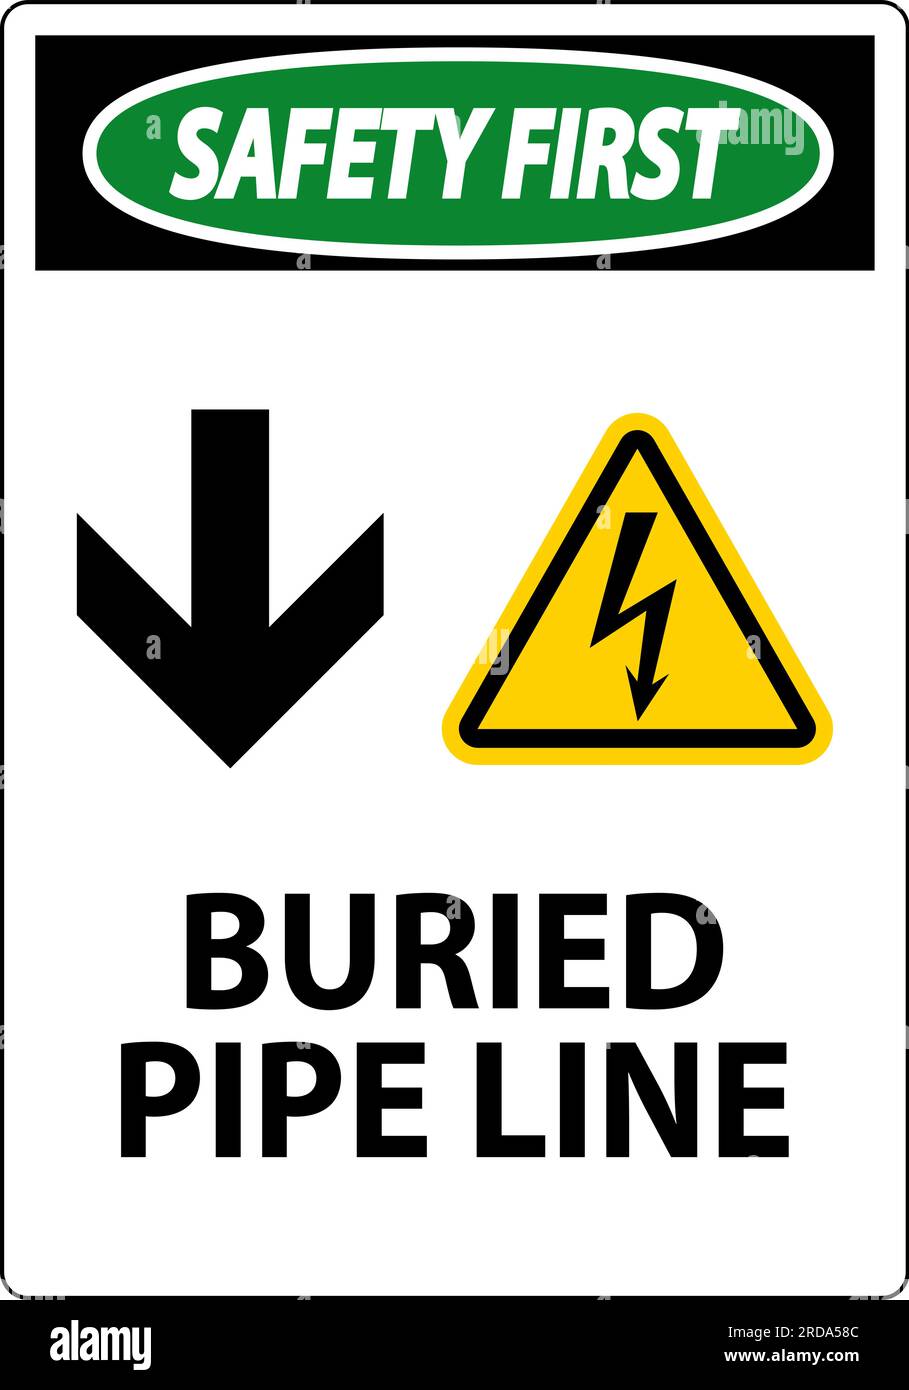 Safety First Sign Buried Pipe Line With Down Arrow and Electric Shock Symbol Stock Vector